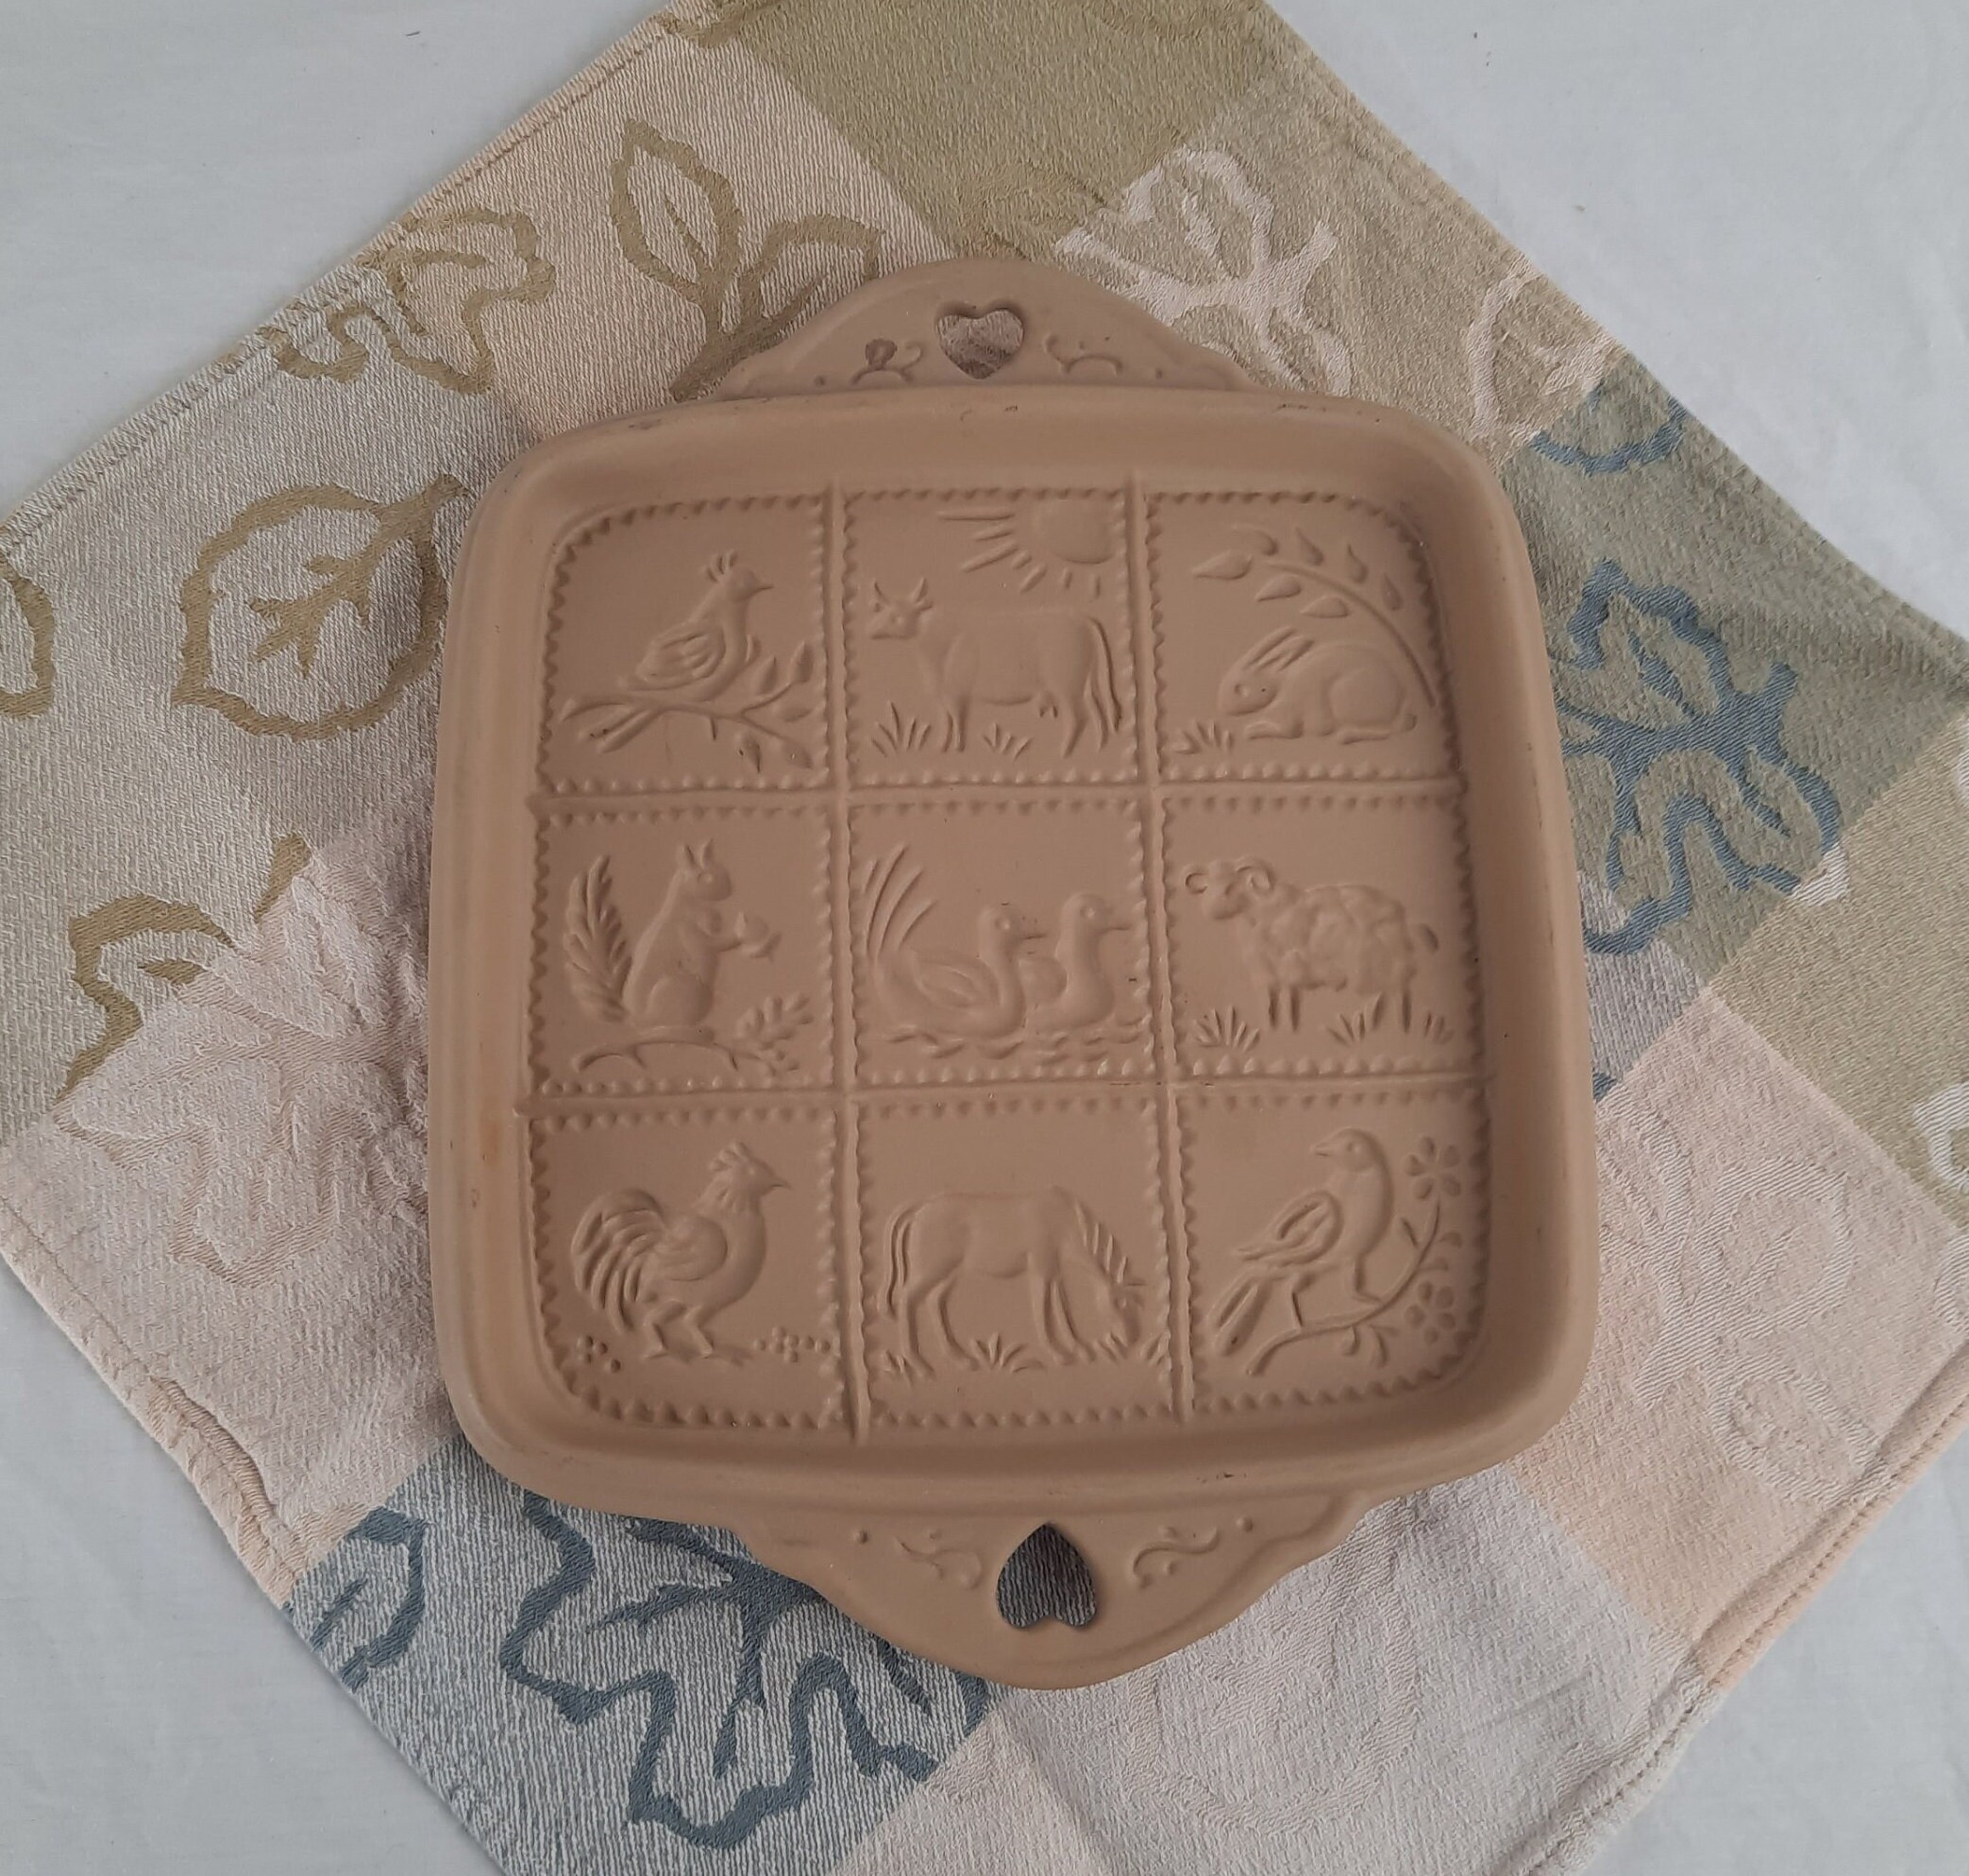 Traditional moulded shortbread – using my Mum's shortbread mould.